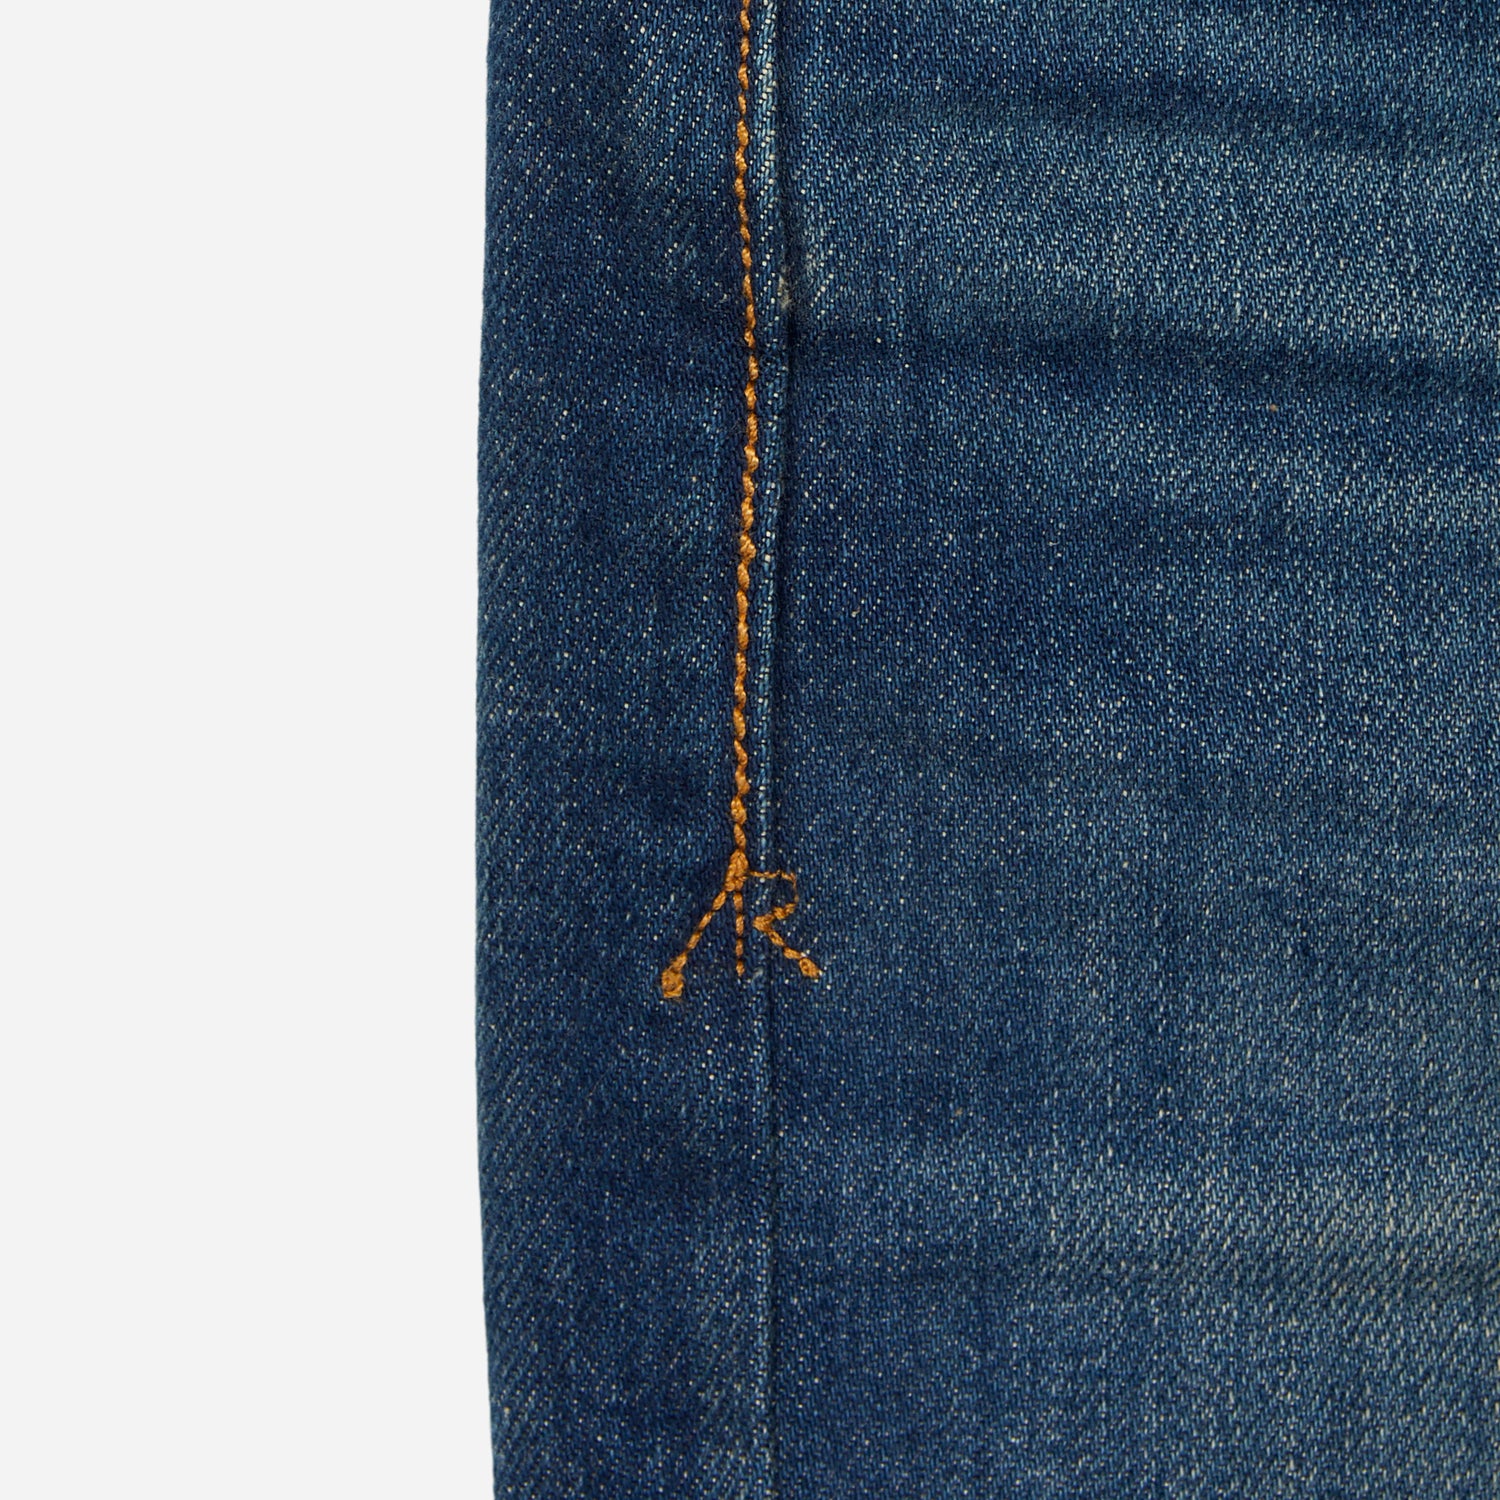 close up of stitching of pair of high quality slim cut men's green hue blue jeans with slight wear